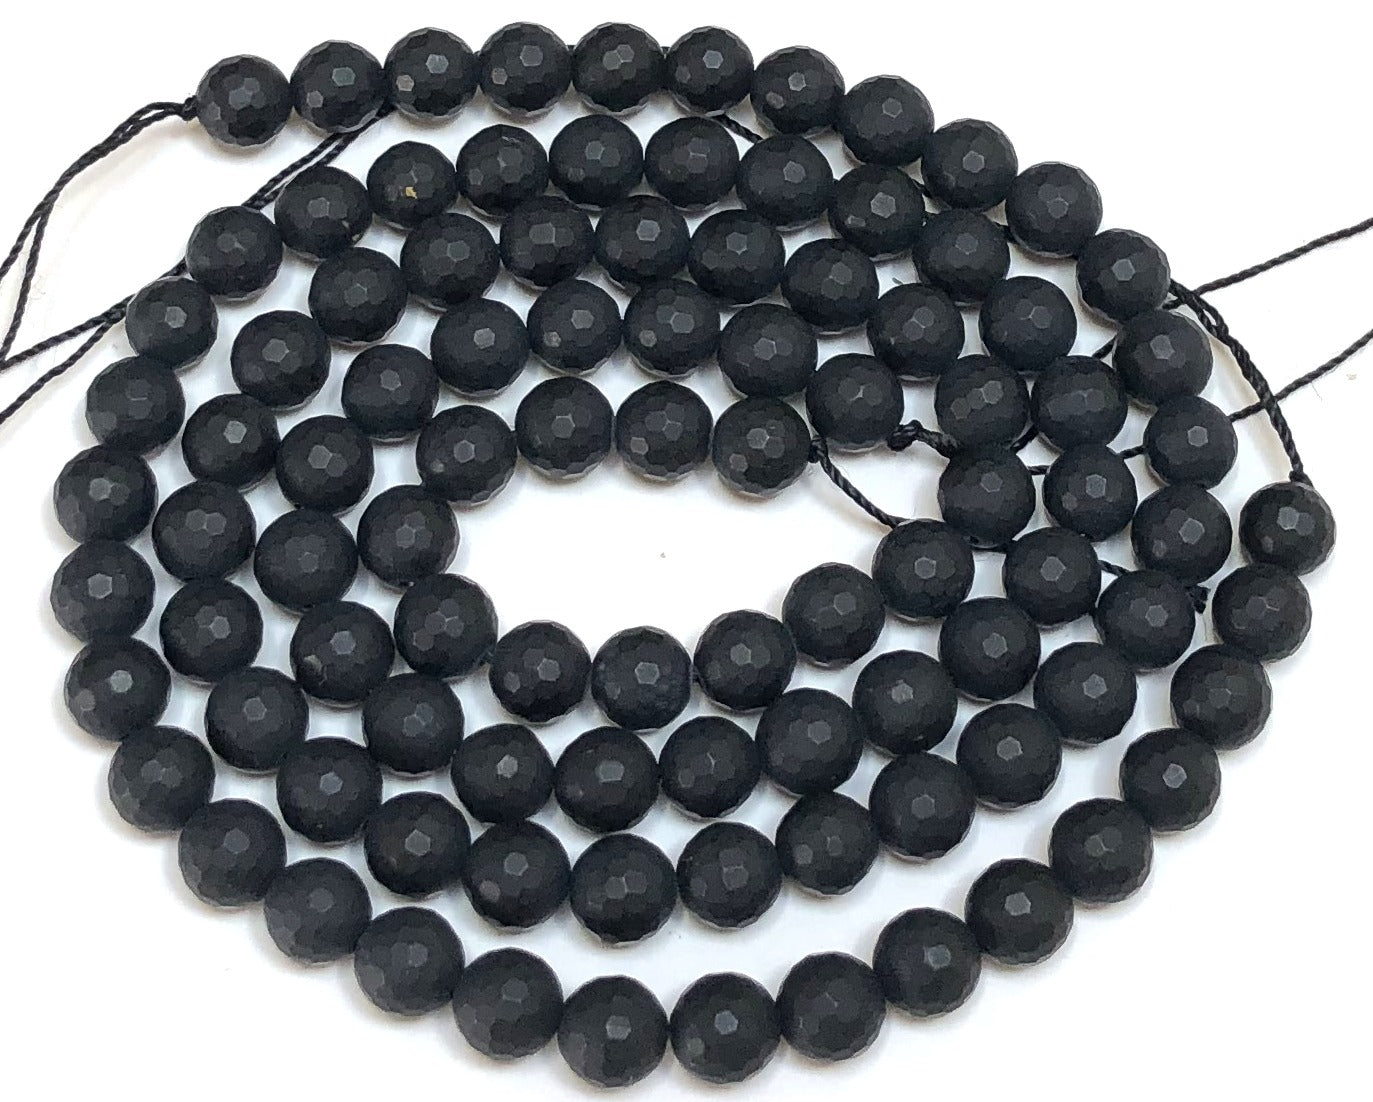 Black Onyx matte 8mm micro faceted round gemstone beads 15" strand